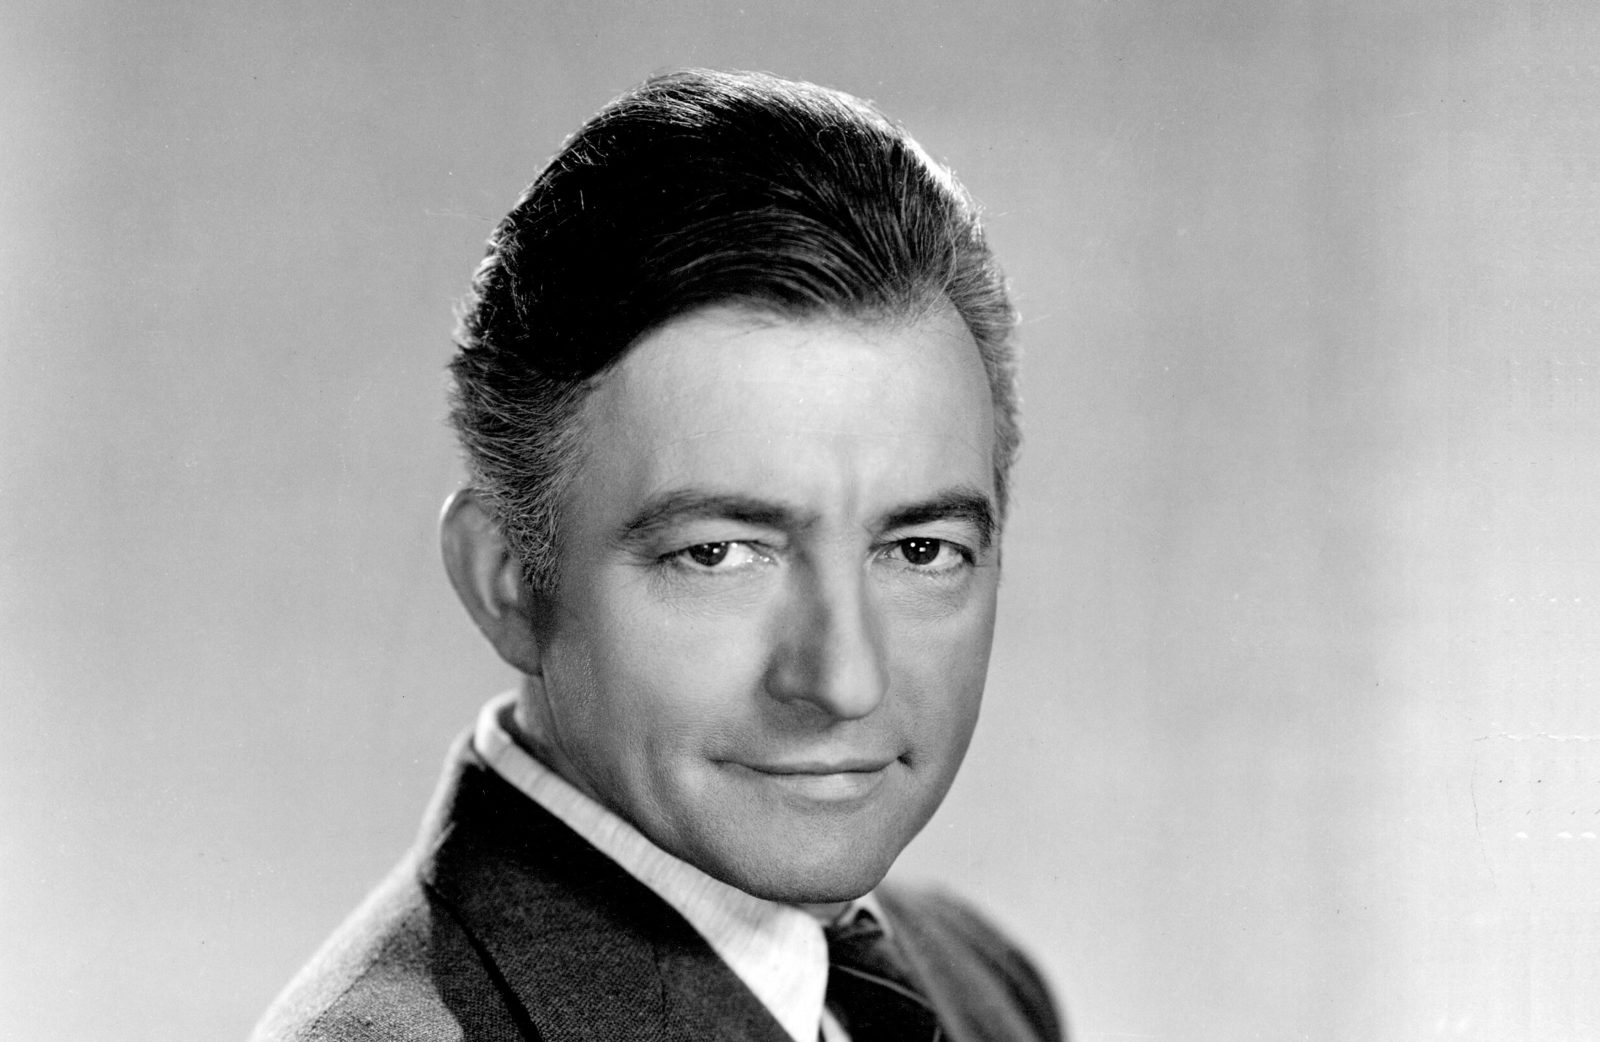 If You Can Score Full Marks on This 1940s Actors Quiz, You Are No Doubt a Boomer Claude Rains